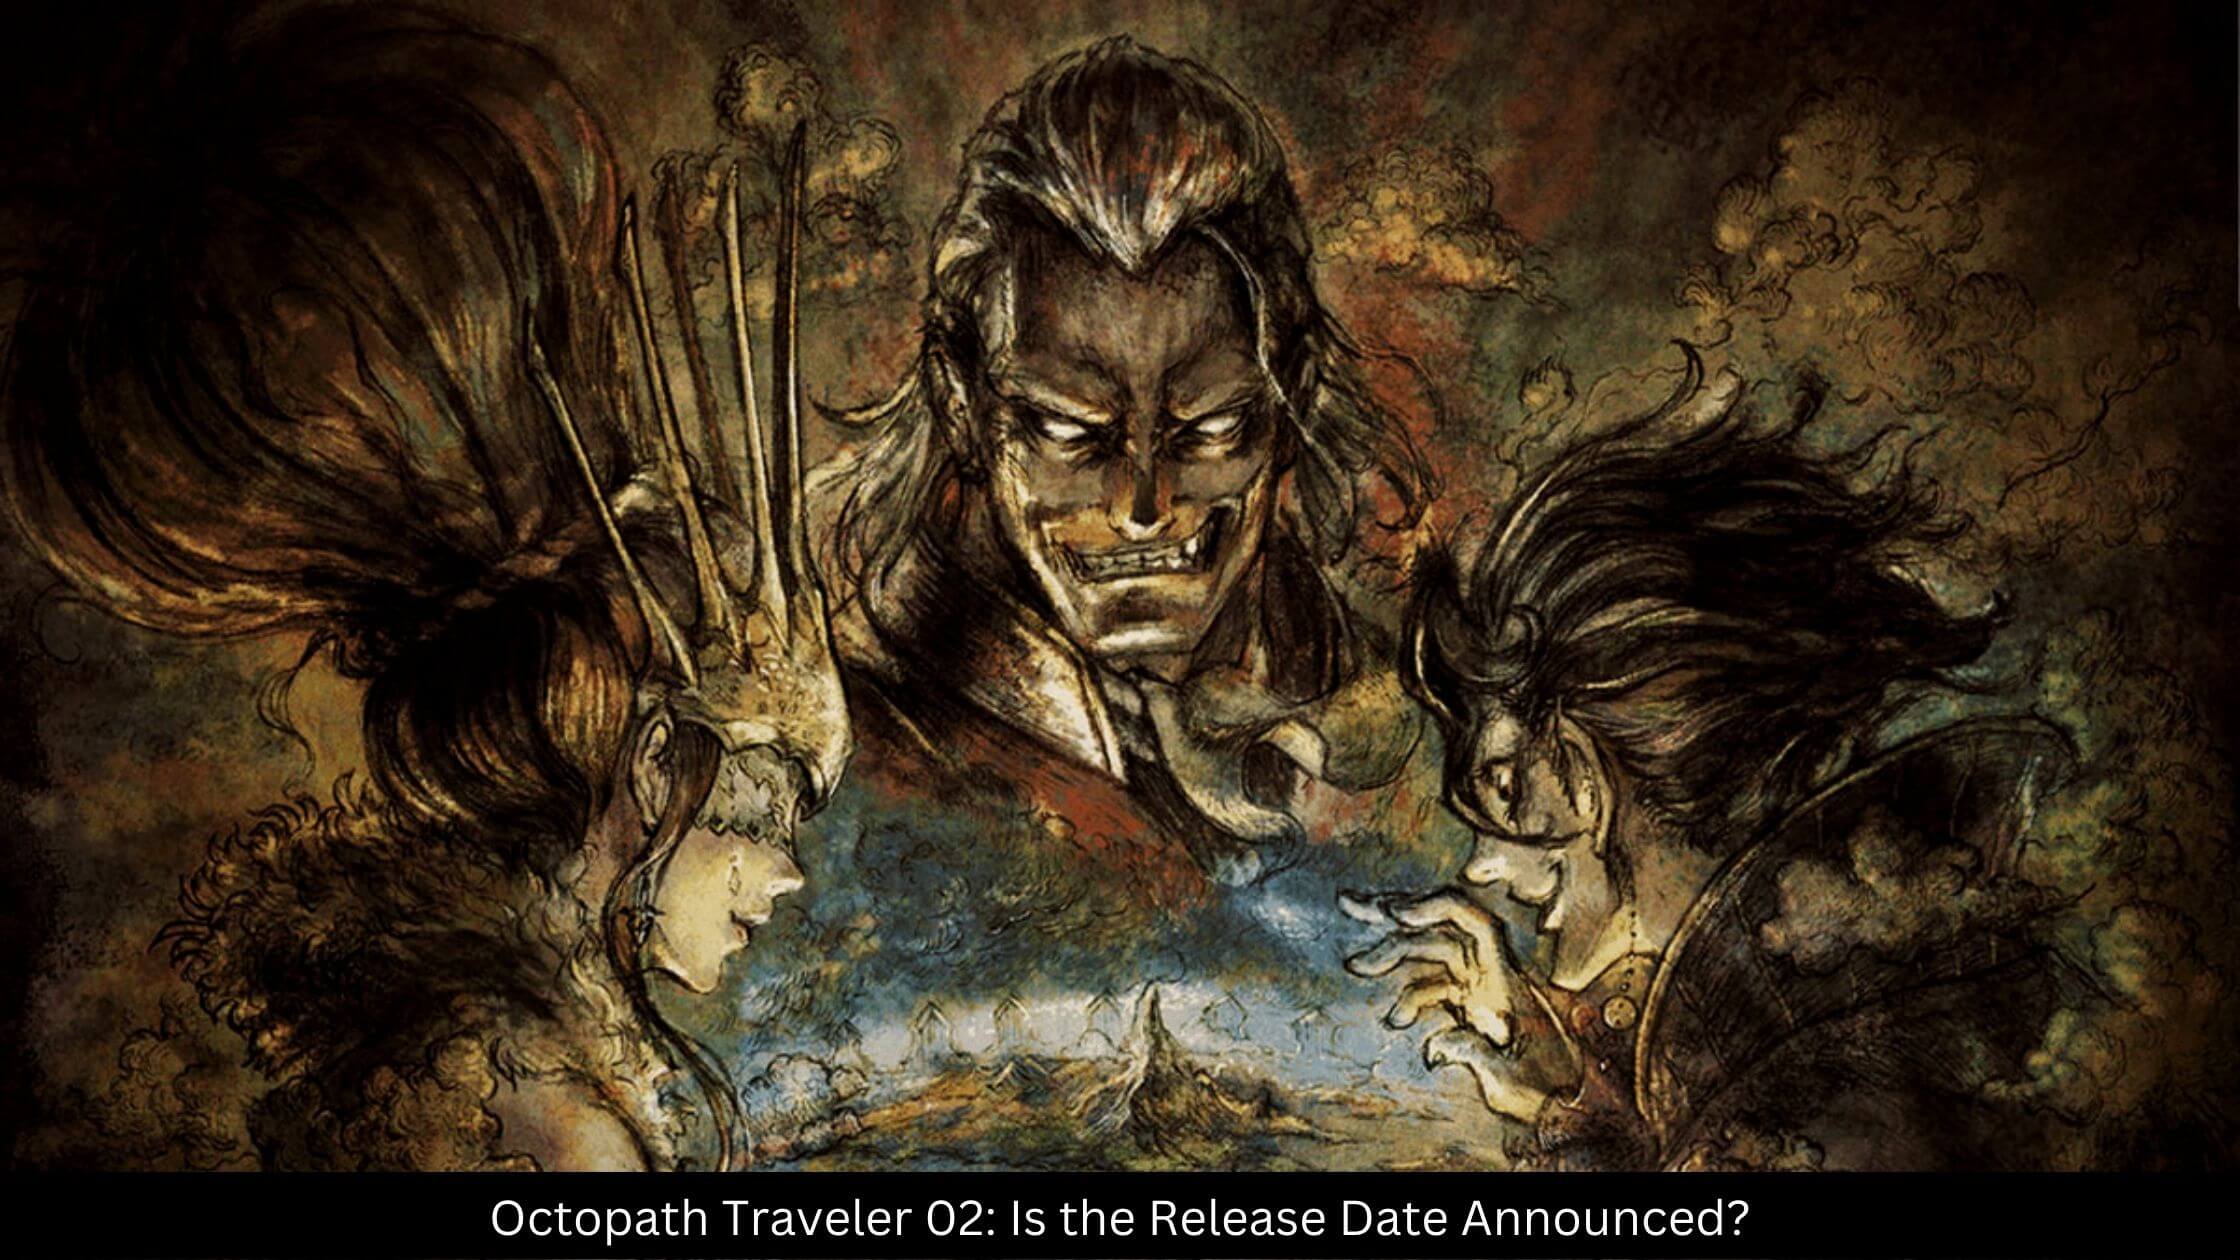 Octopath Traveler 02 Is the Release Date Announced